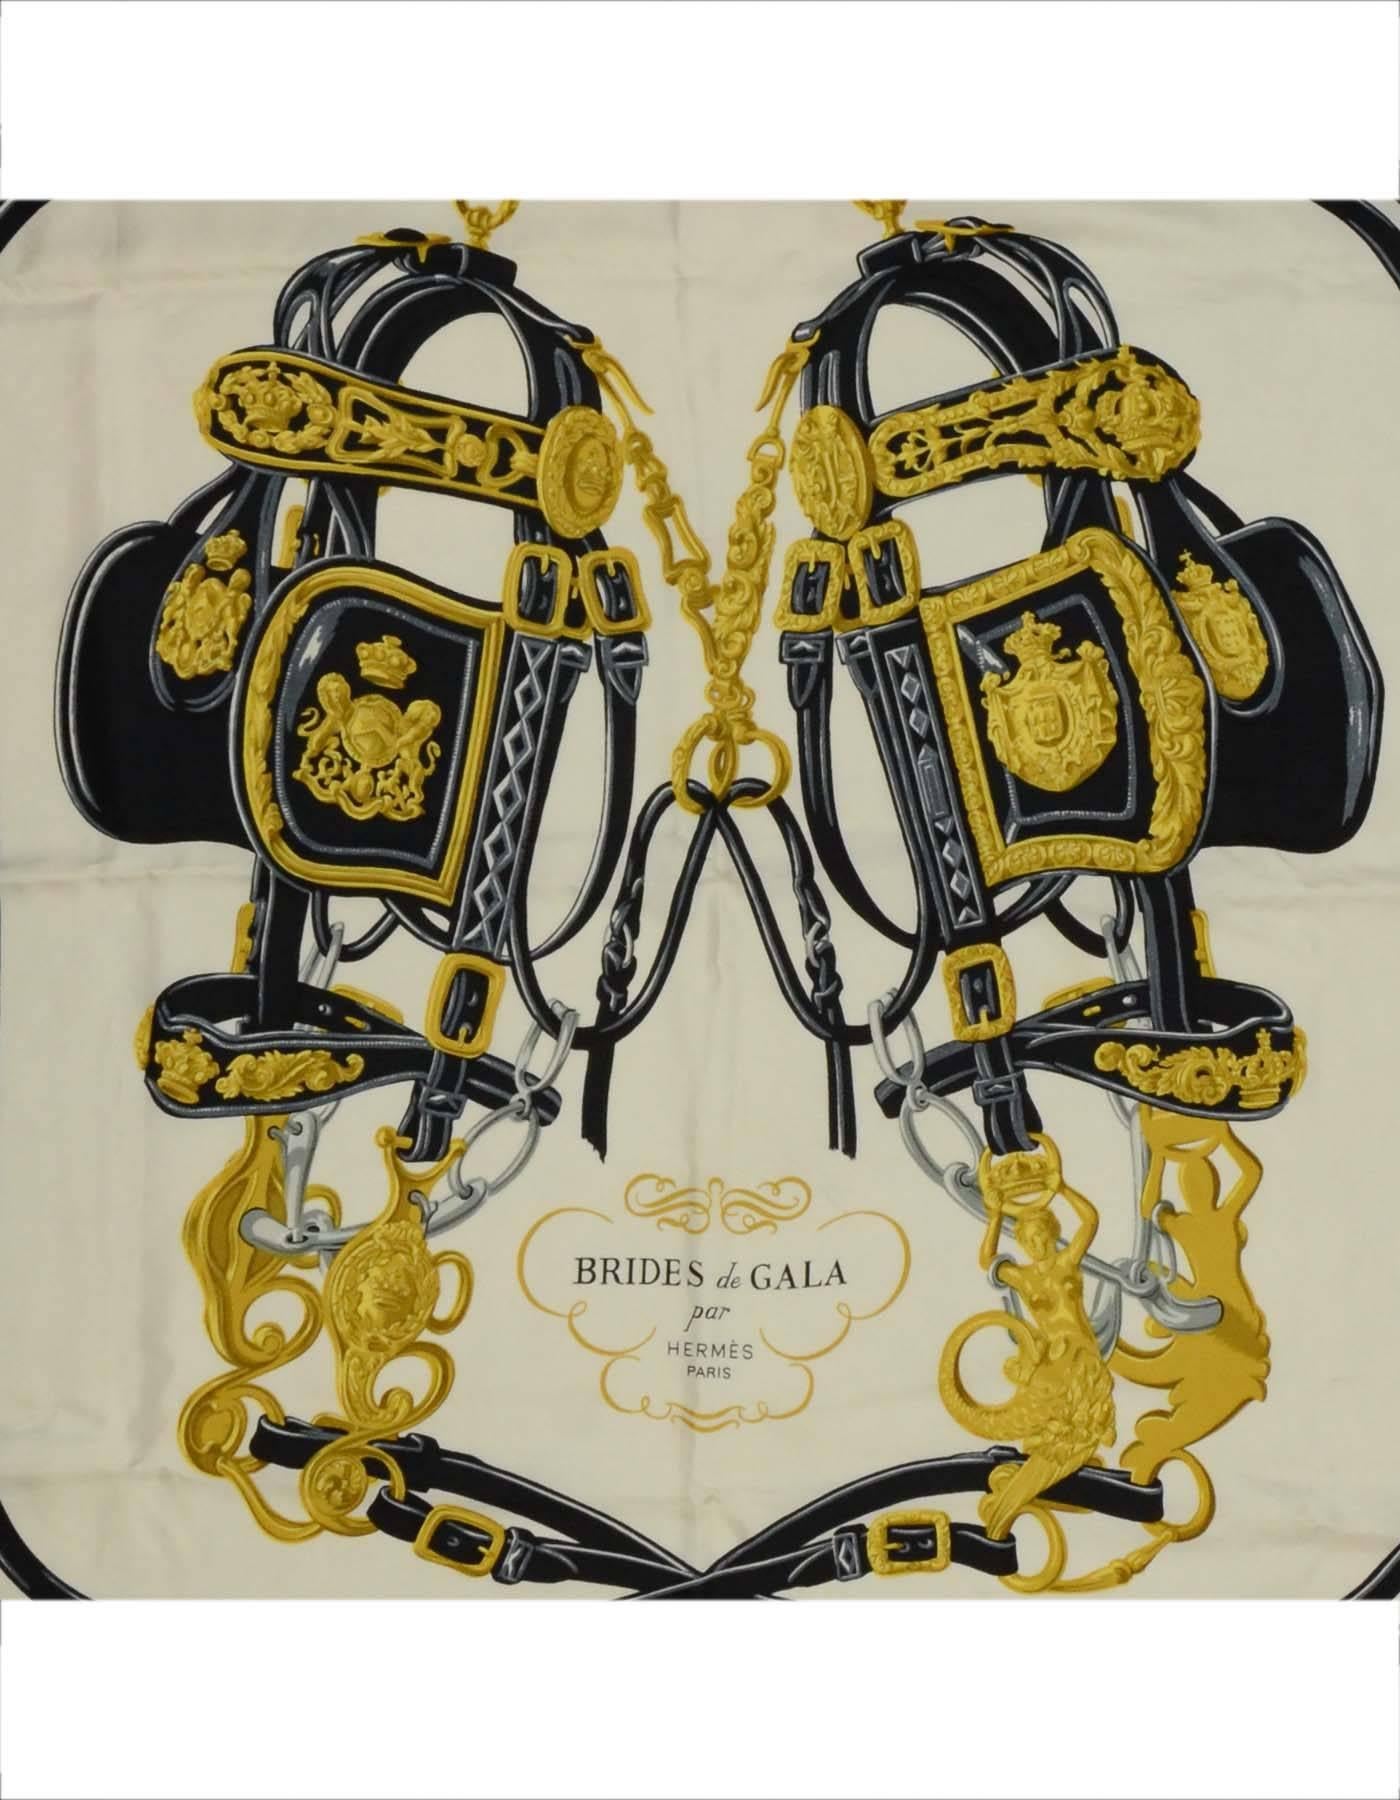 Hermes Navy & Ivory Brides De Gala 90cm Silk Scarf
Features equestrian theme printed throughout

Made In: France
Color: Ivory, gold and navy
Composition: 100% silk
Overall Condition: Excellent pre-owned condition with the exception of one